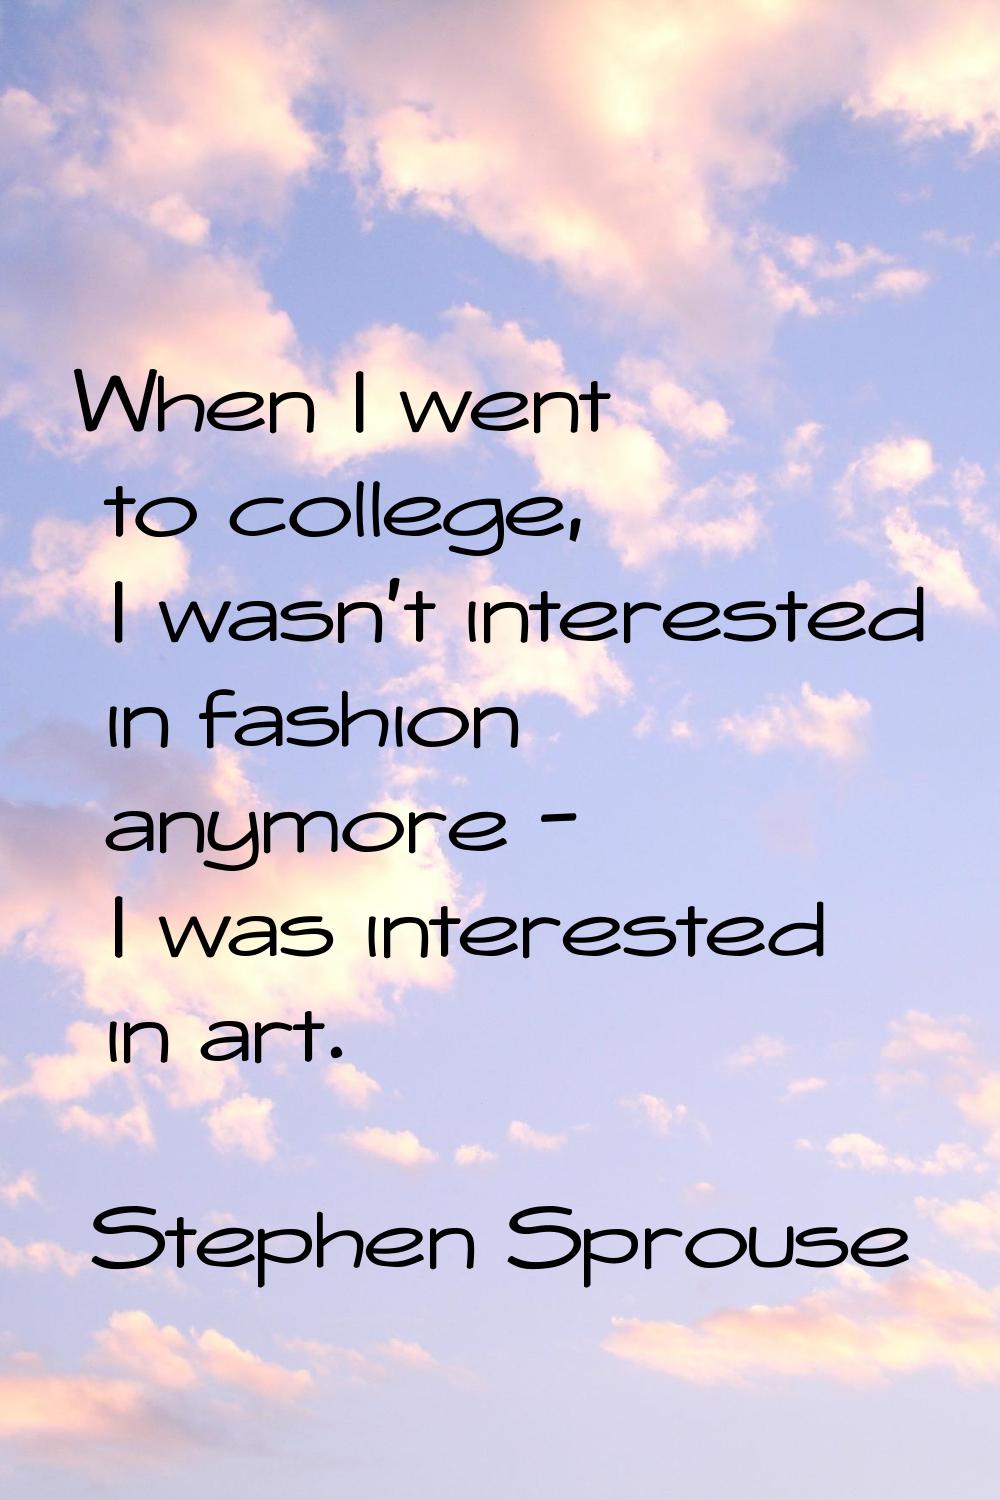 When I went to college, I wasn't interested in fashion anymore - I was interested in art.